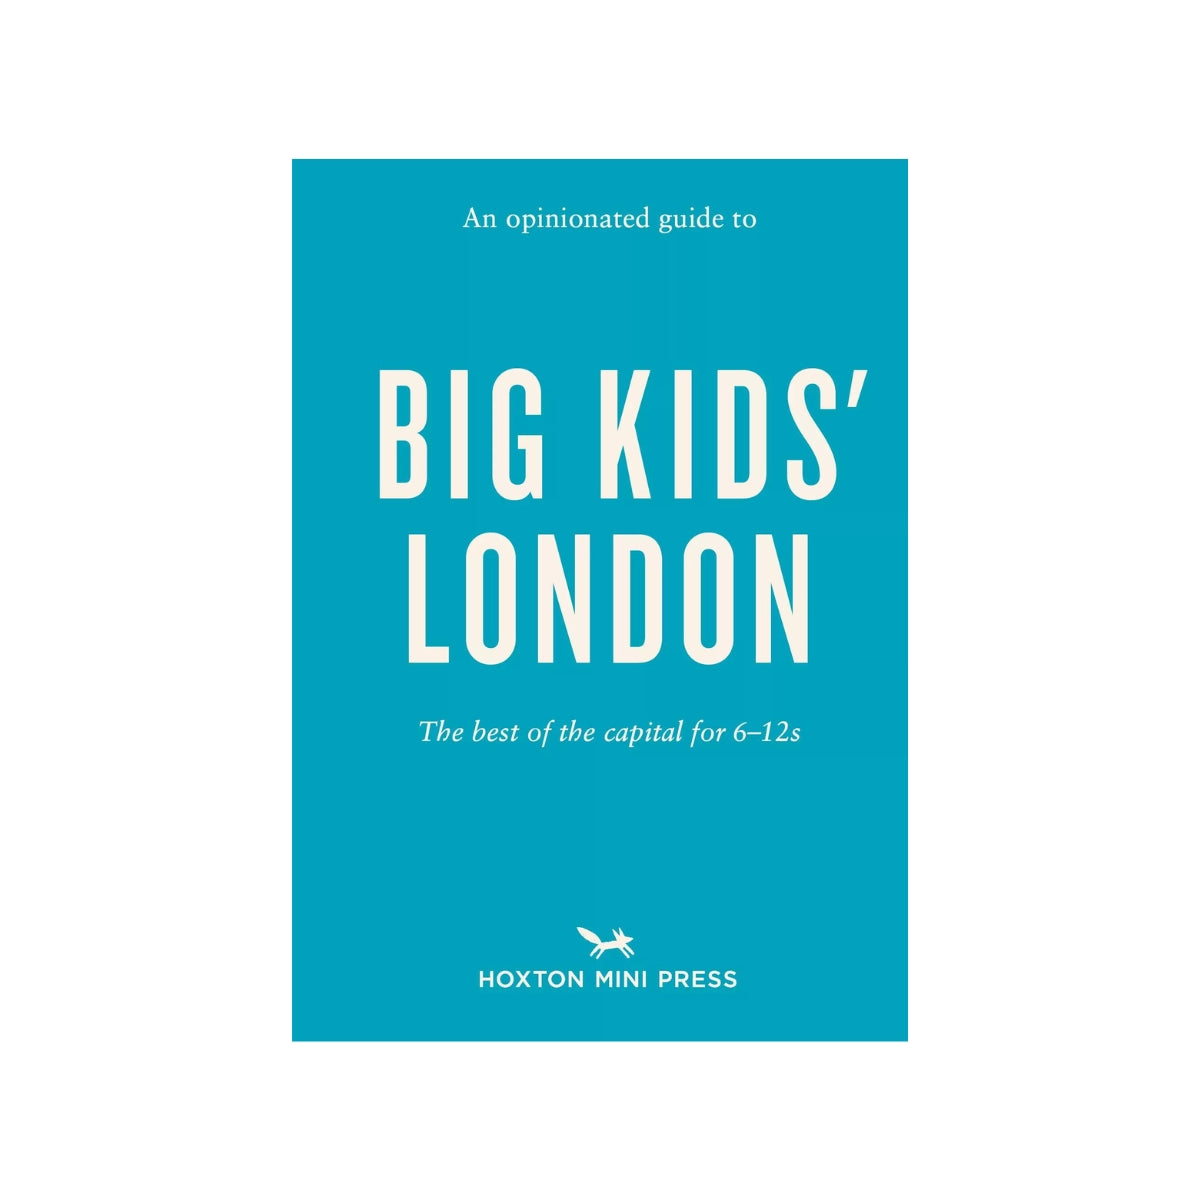 An Opinionated Guide to Big Kids' London